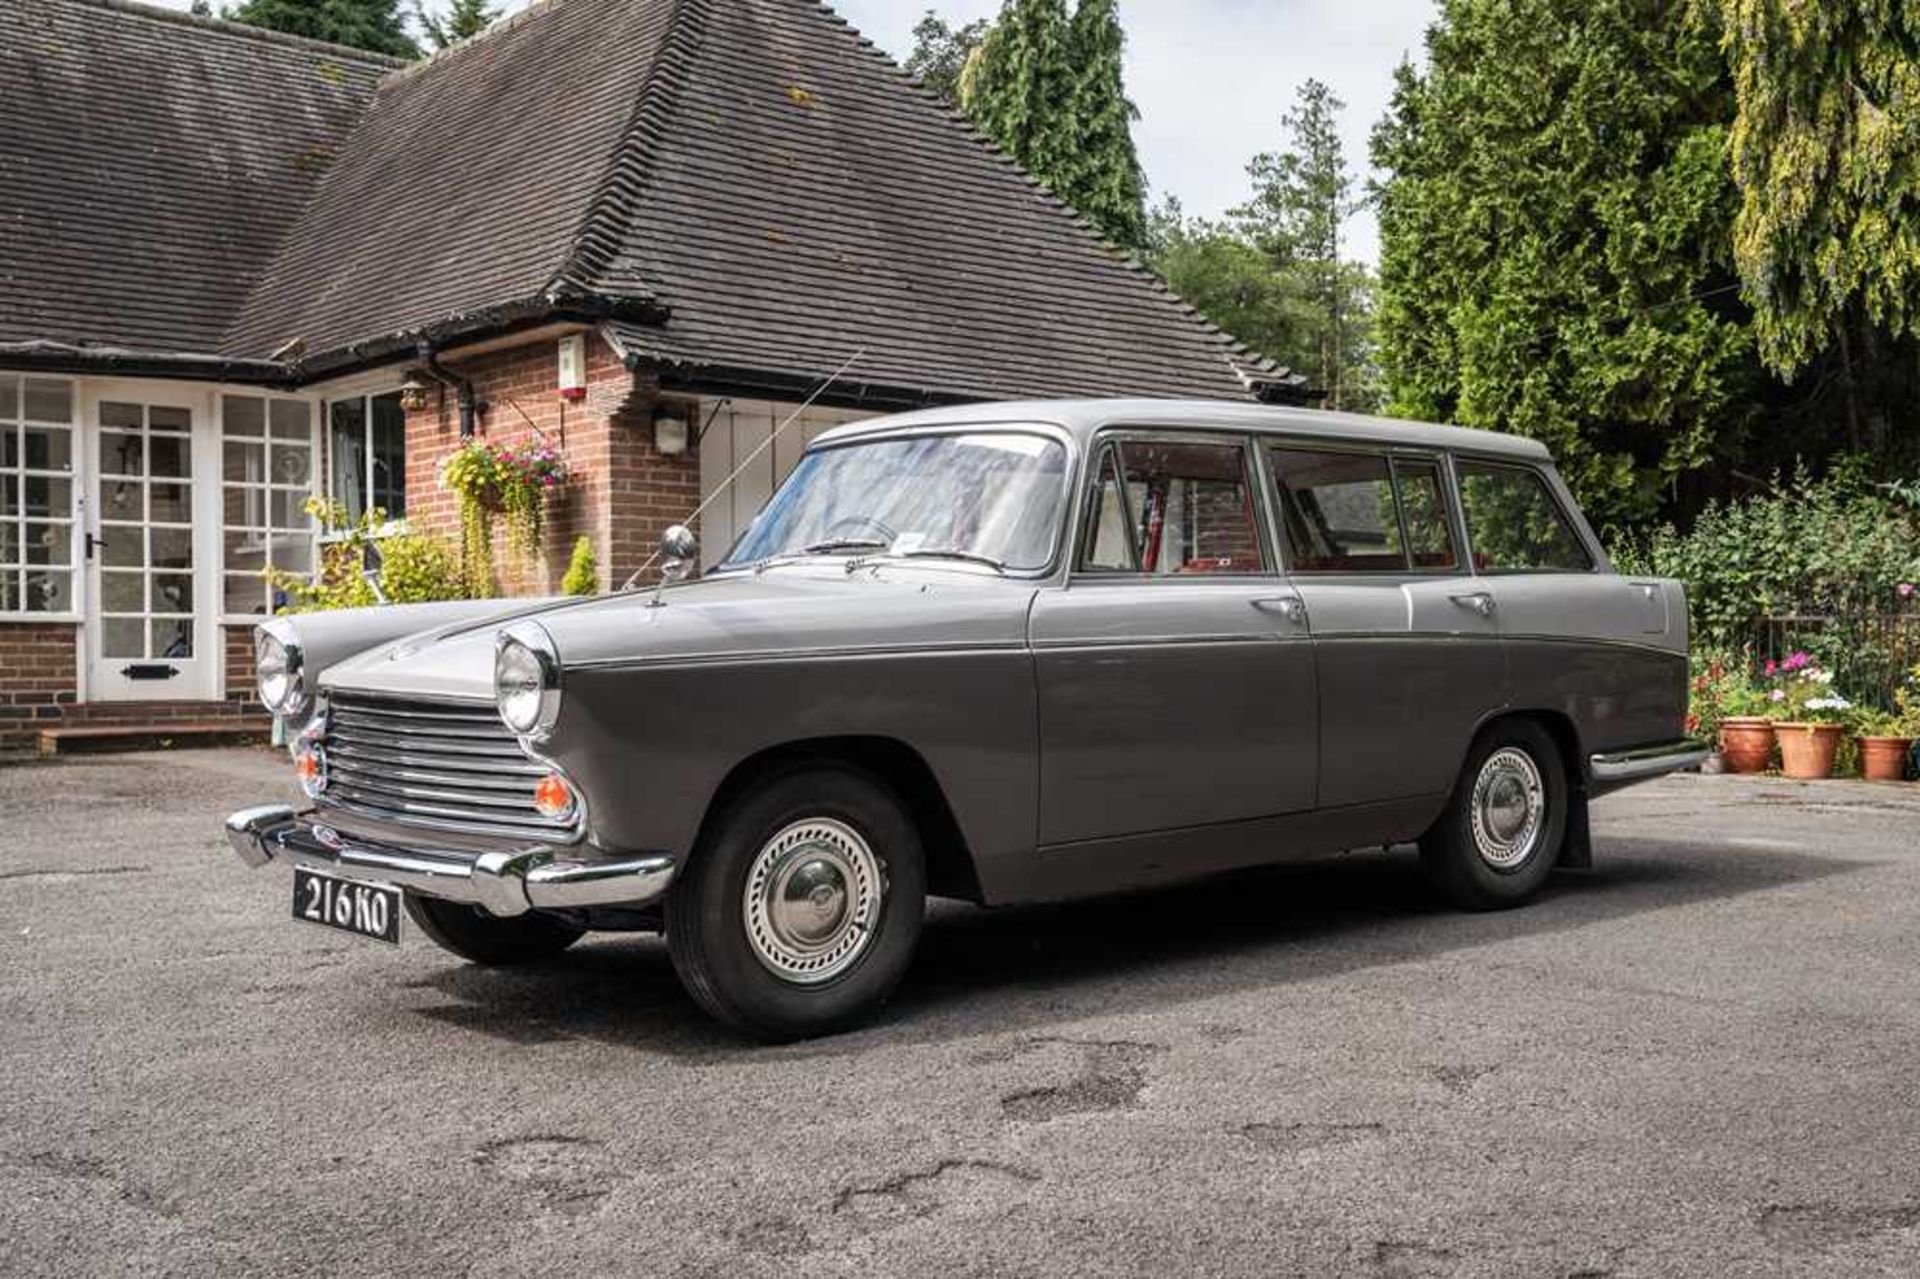 1964 Morris Oxford Series VI Farina Traveller Just 7,000 miles from new - Image 6 of 98